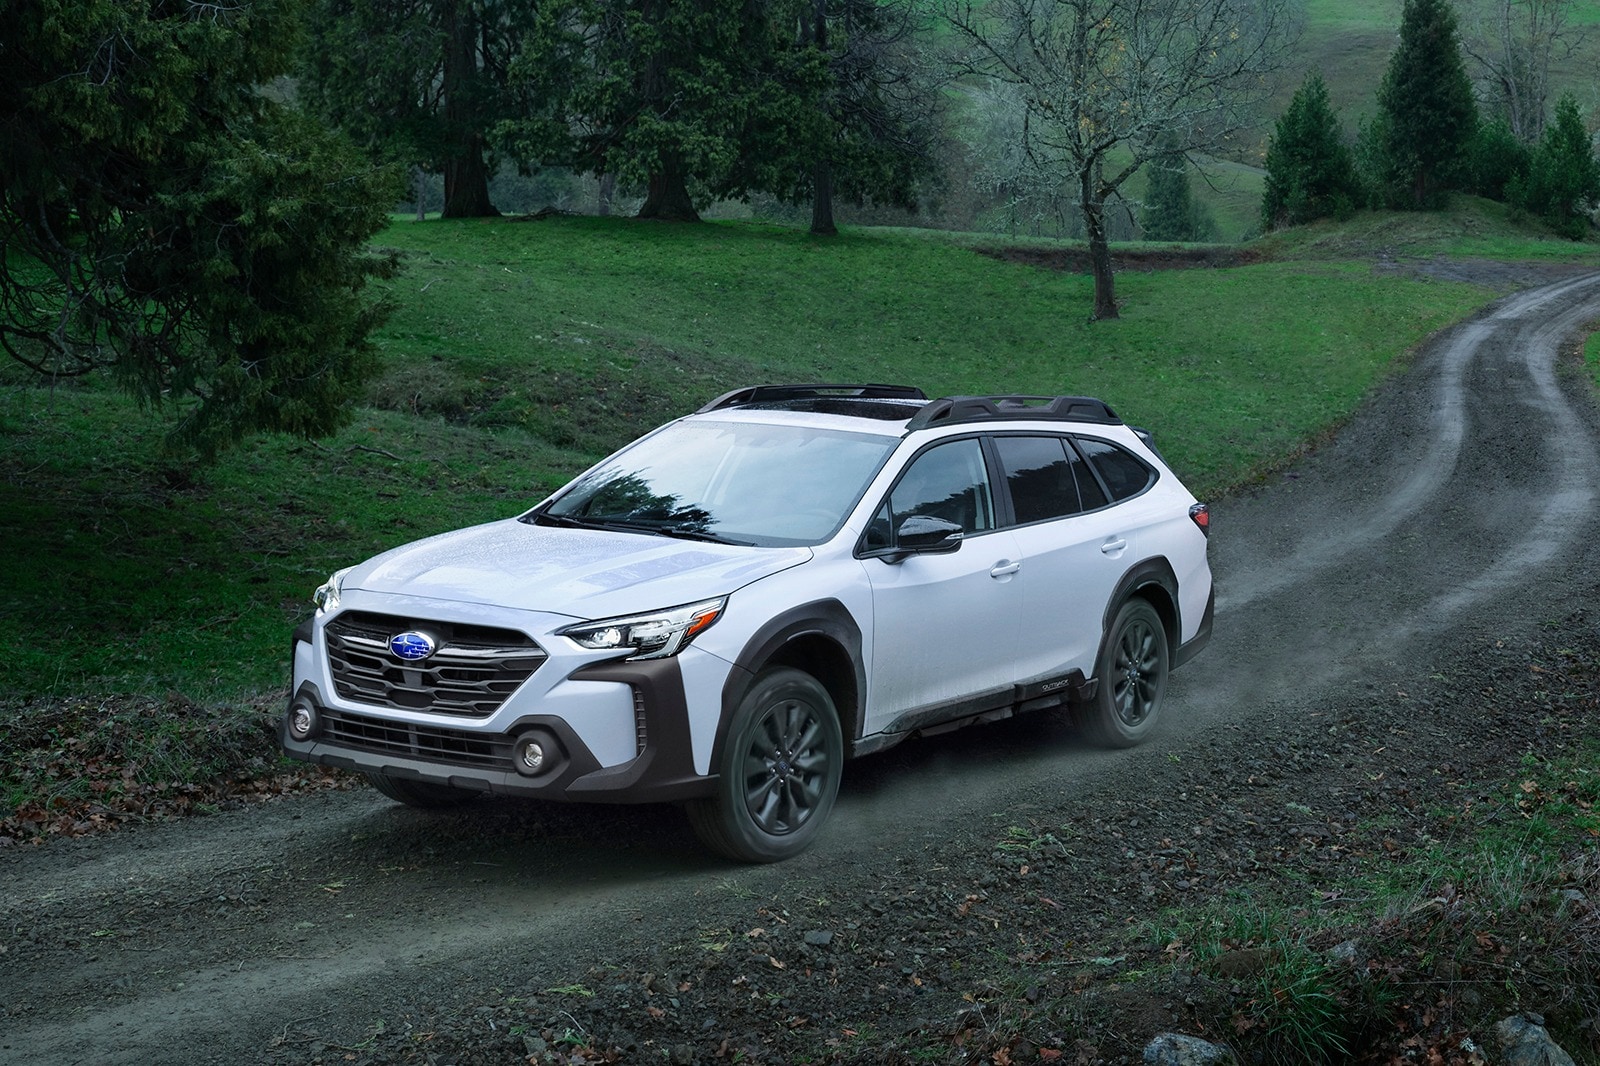 2023 Subaru Outback First Look: A Nip Here, a Tuck There